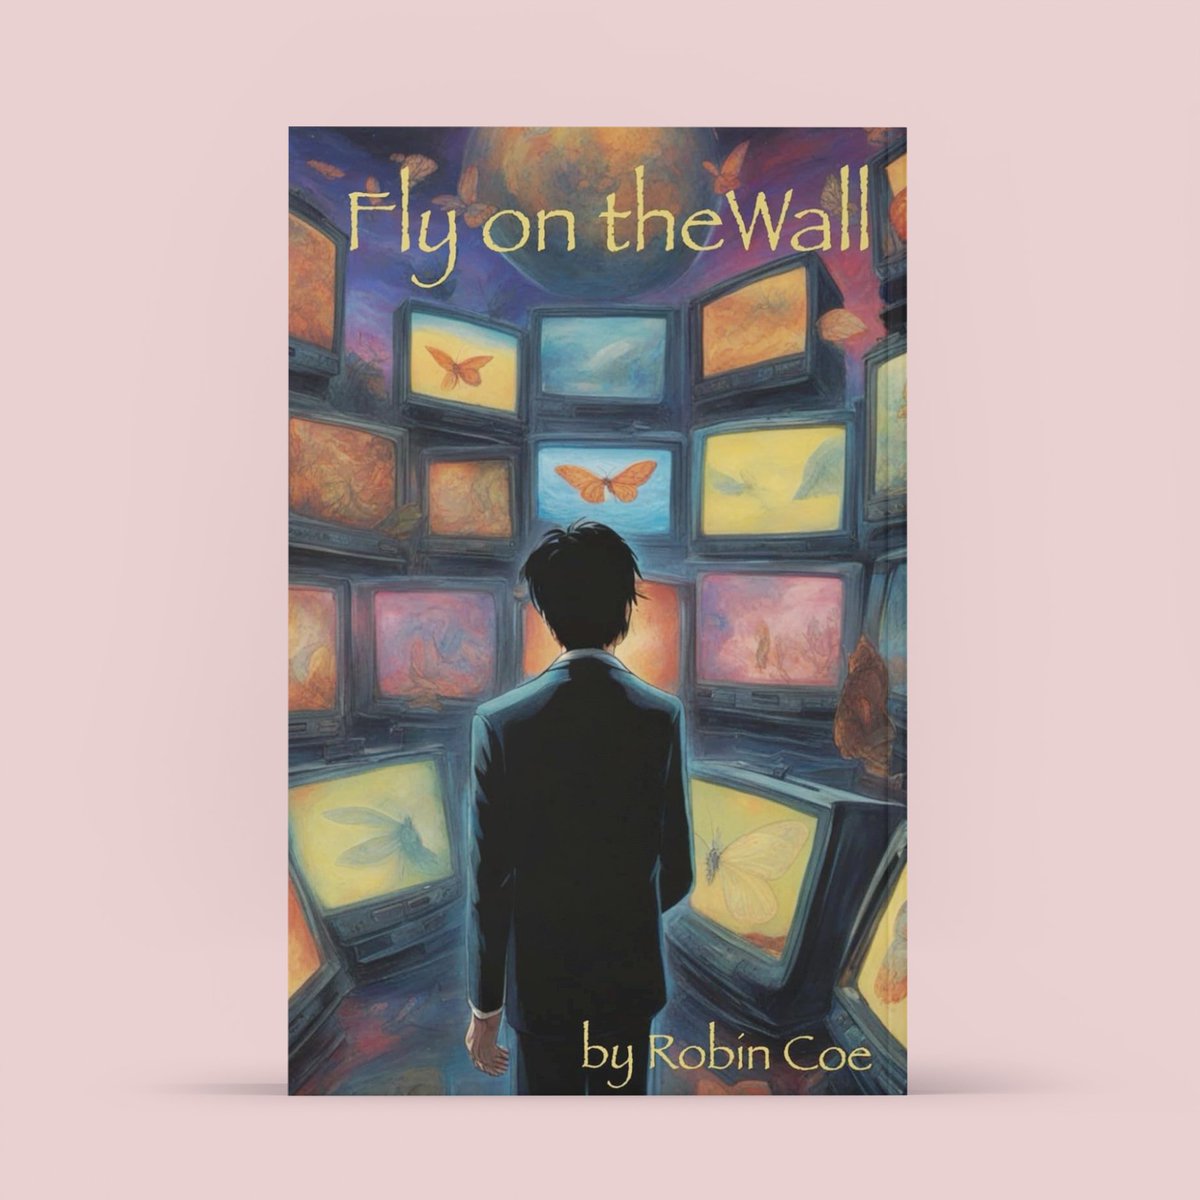 Is it purgatory or the convergence of parallel worlds? Find out in 'Fly on the Wall'. #amazon #kindle #amazonkdp #visionaryfiction #authors #robincoe #flyonthewall #books #reading

dlvr.it/T3XSlx